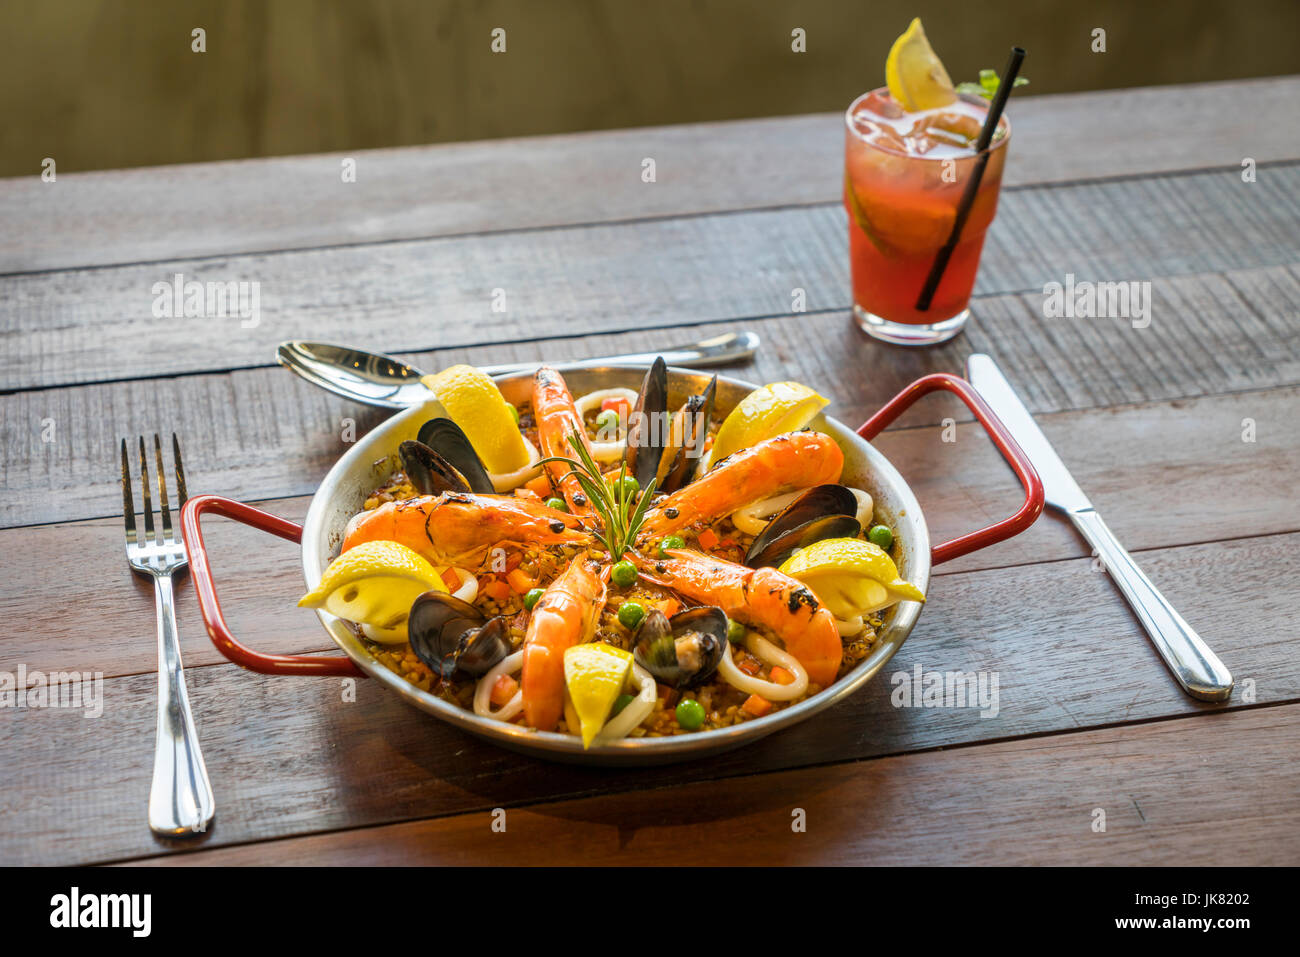 Paella with seafood vegetables and saffron served in the traditional pan. Stock Photo